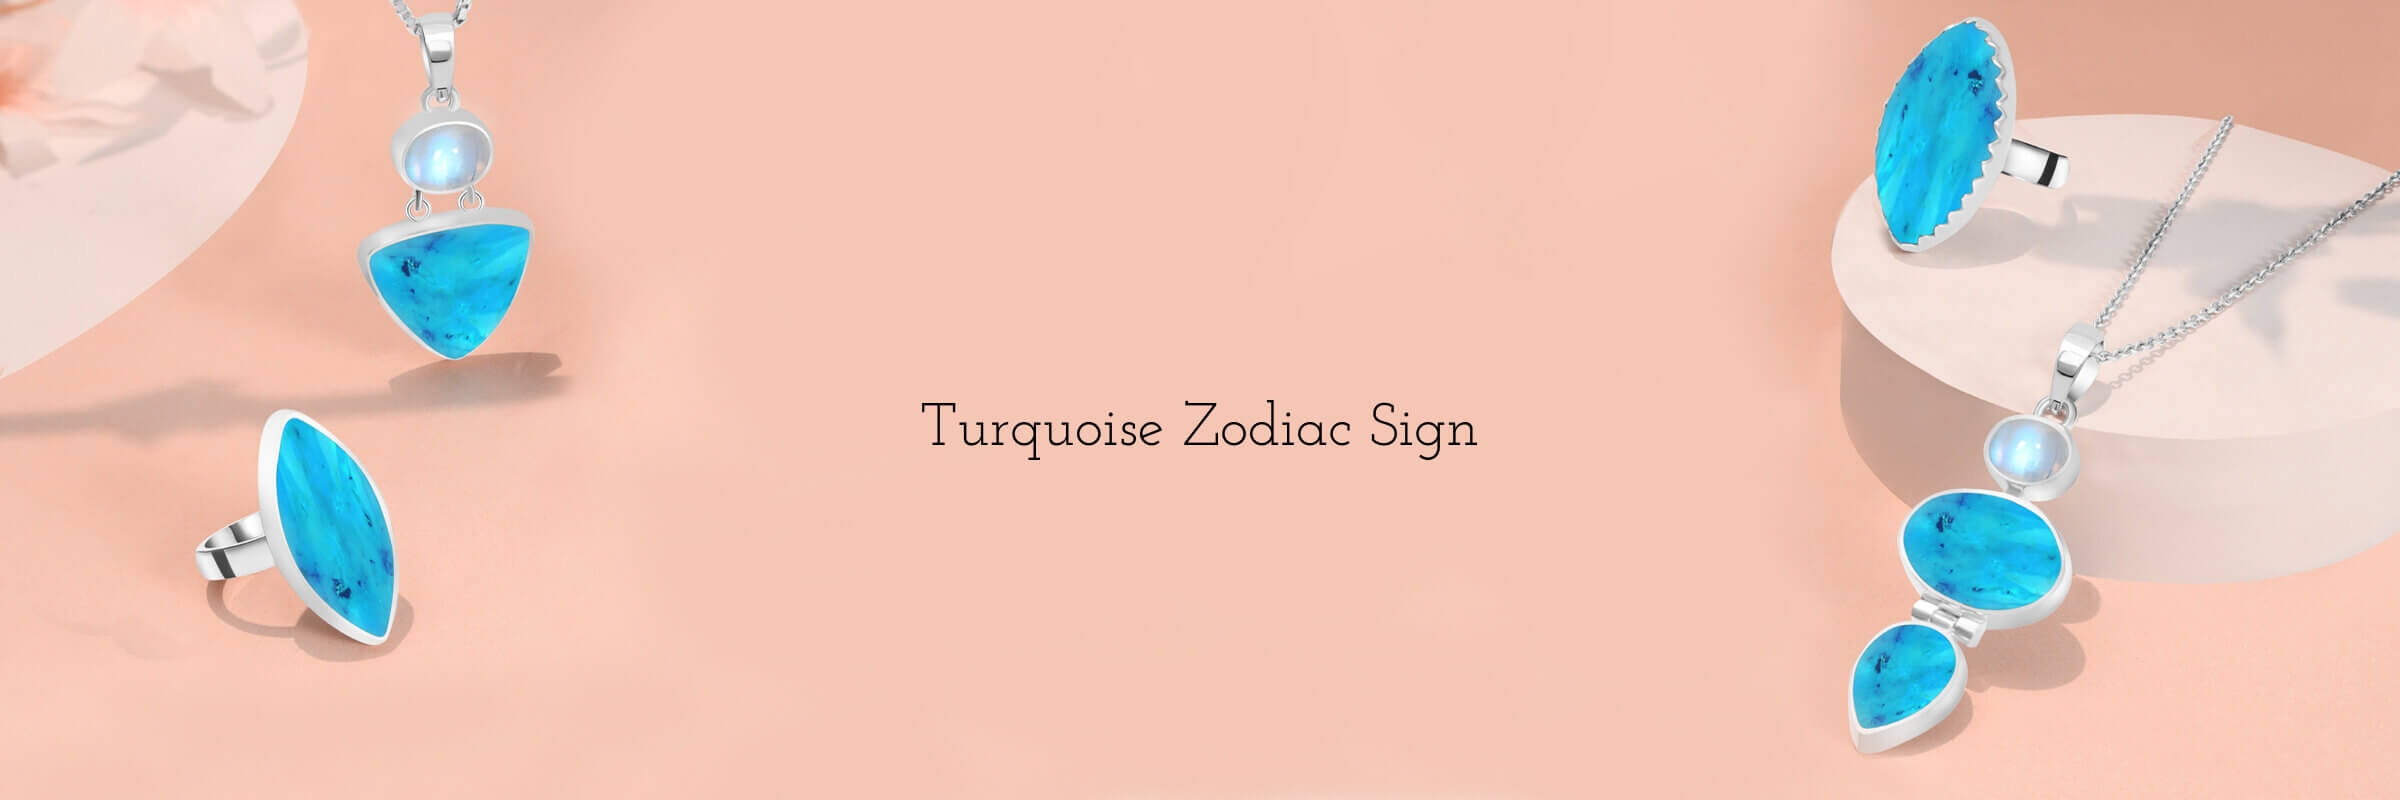 Zodiac sign associated with Turquoise